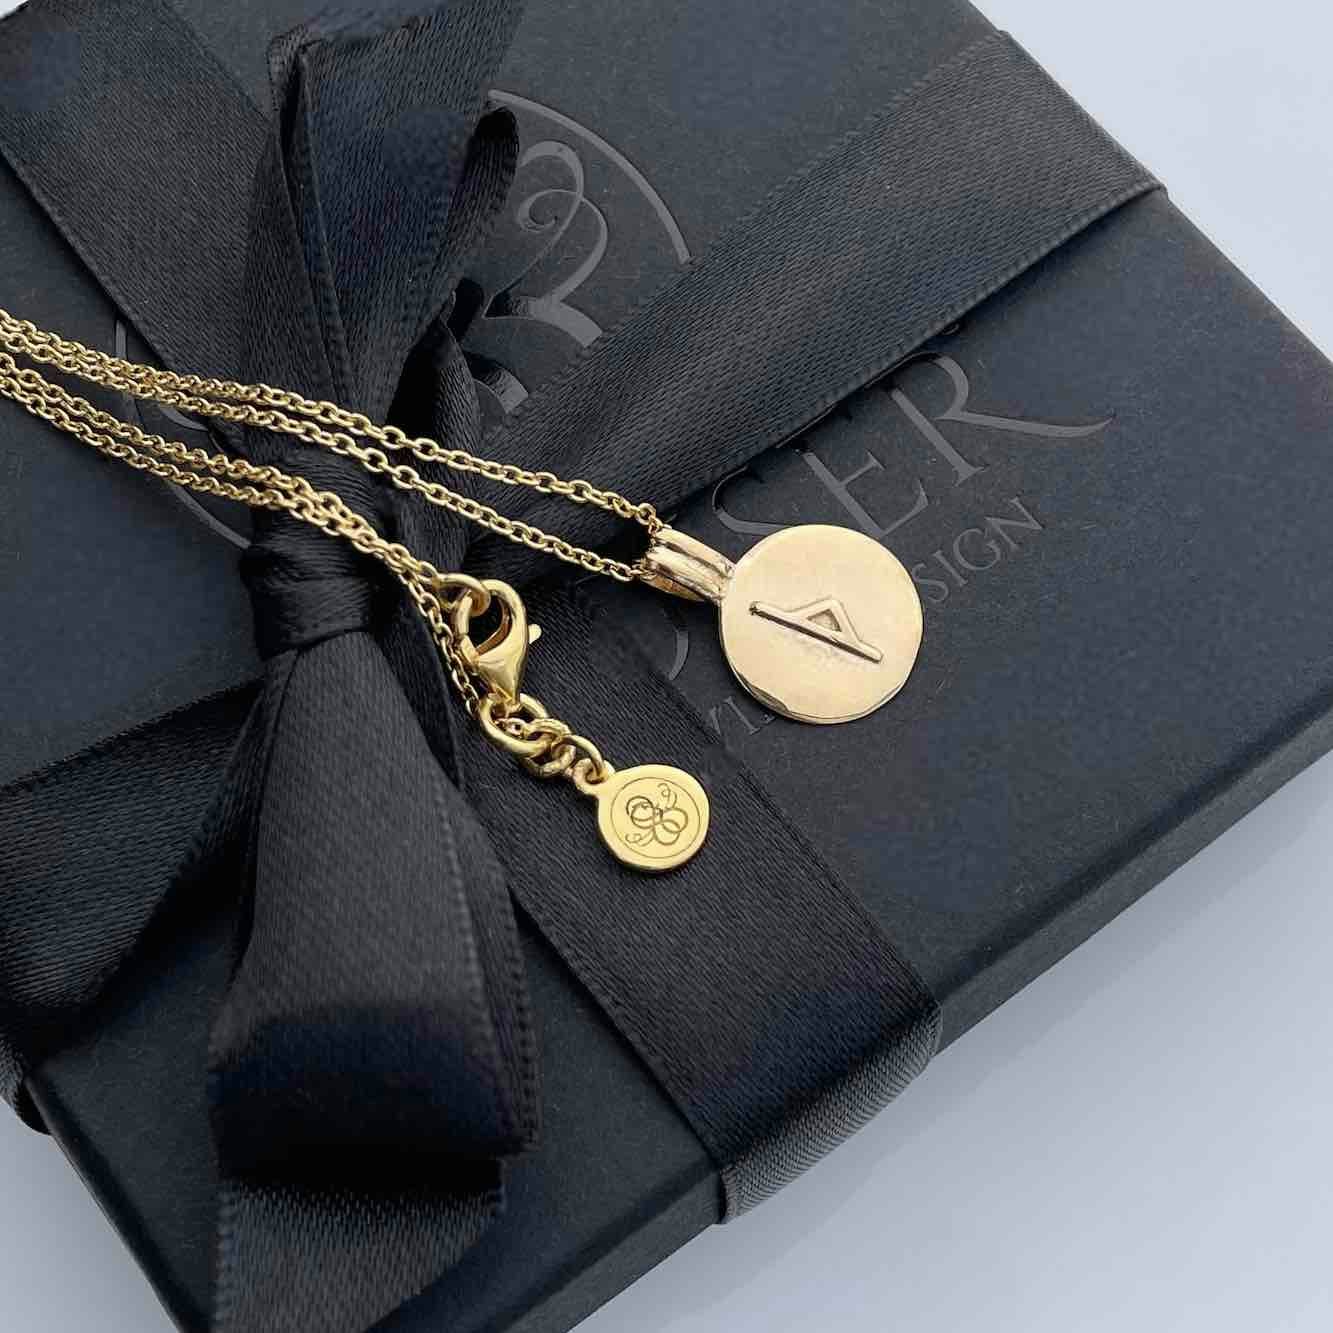 Soldiser Rune Pendant Thurs Gold Necklace and Gift Box